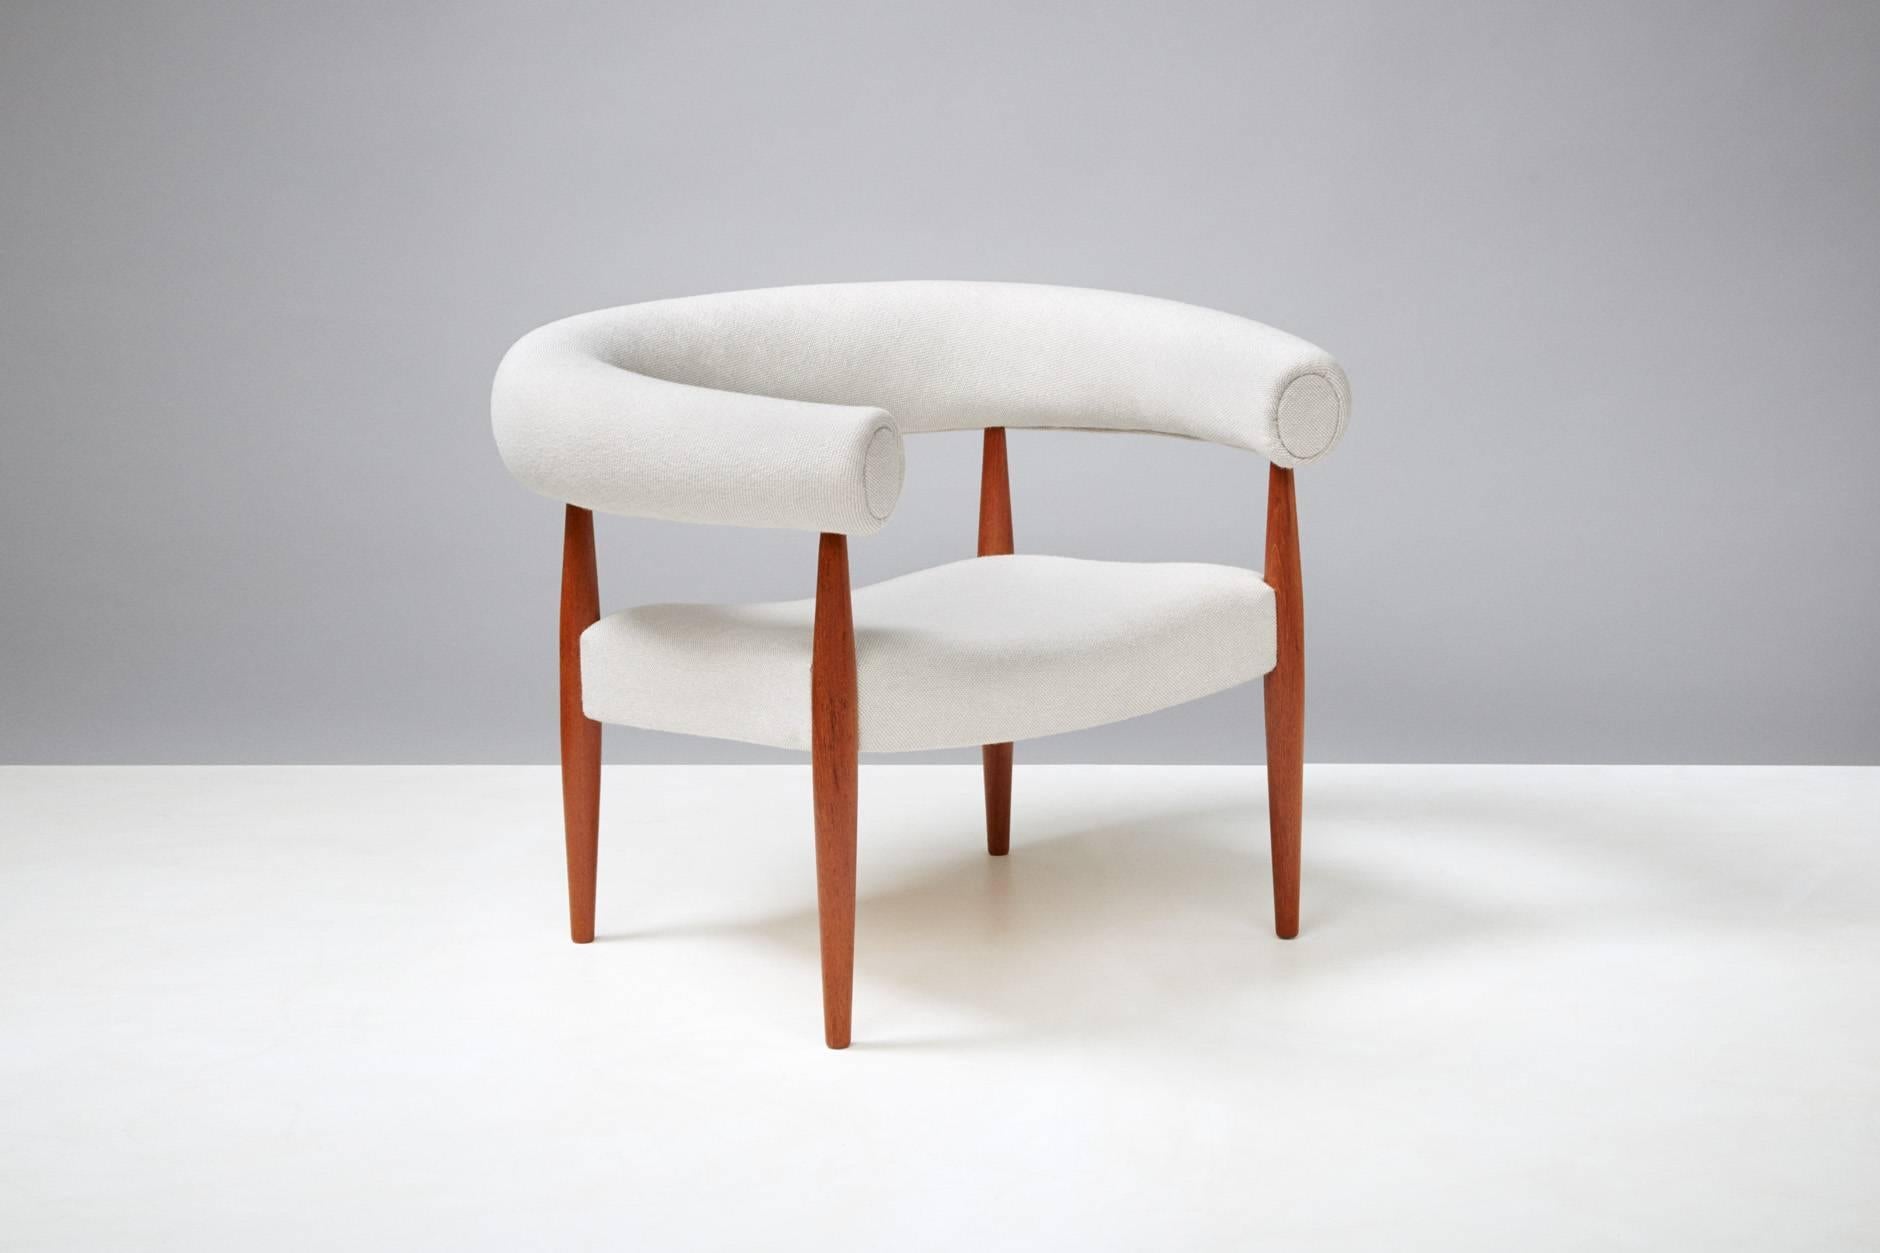 Model 114 ring chair, 1958

Teak legs, seat and back reupholstered in wool fabric. Produced by master cabinetmaker Kolds Savvaerk, Denmark. Rarely seen model. 

Literature: Noritsugu Oda: 'Danish Chairs' (p.167).